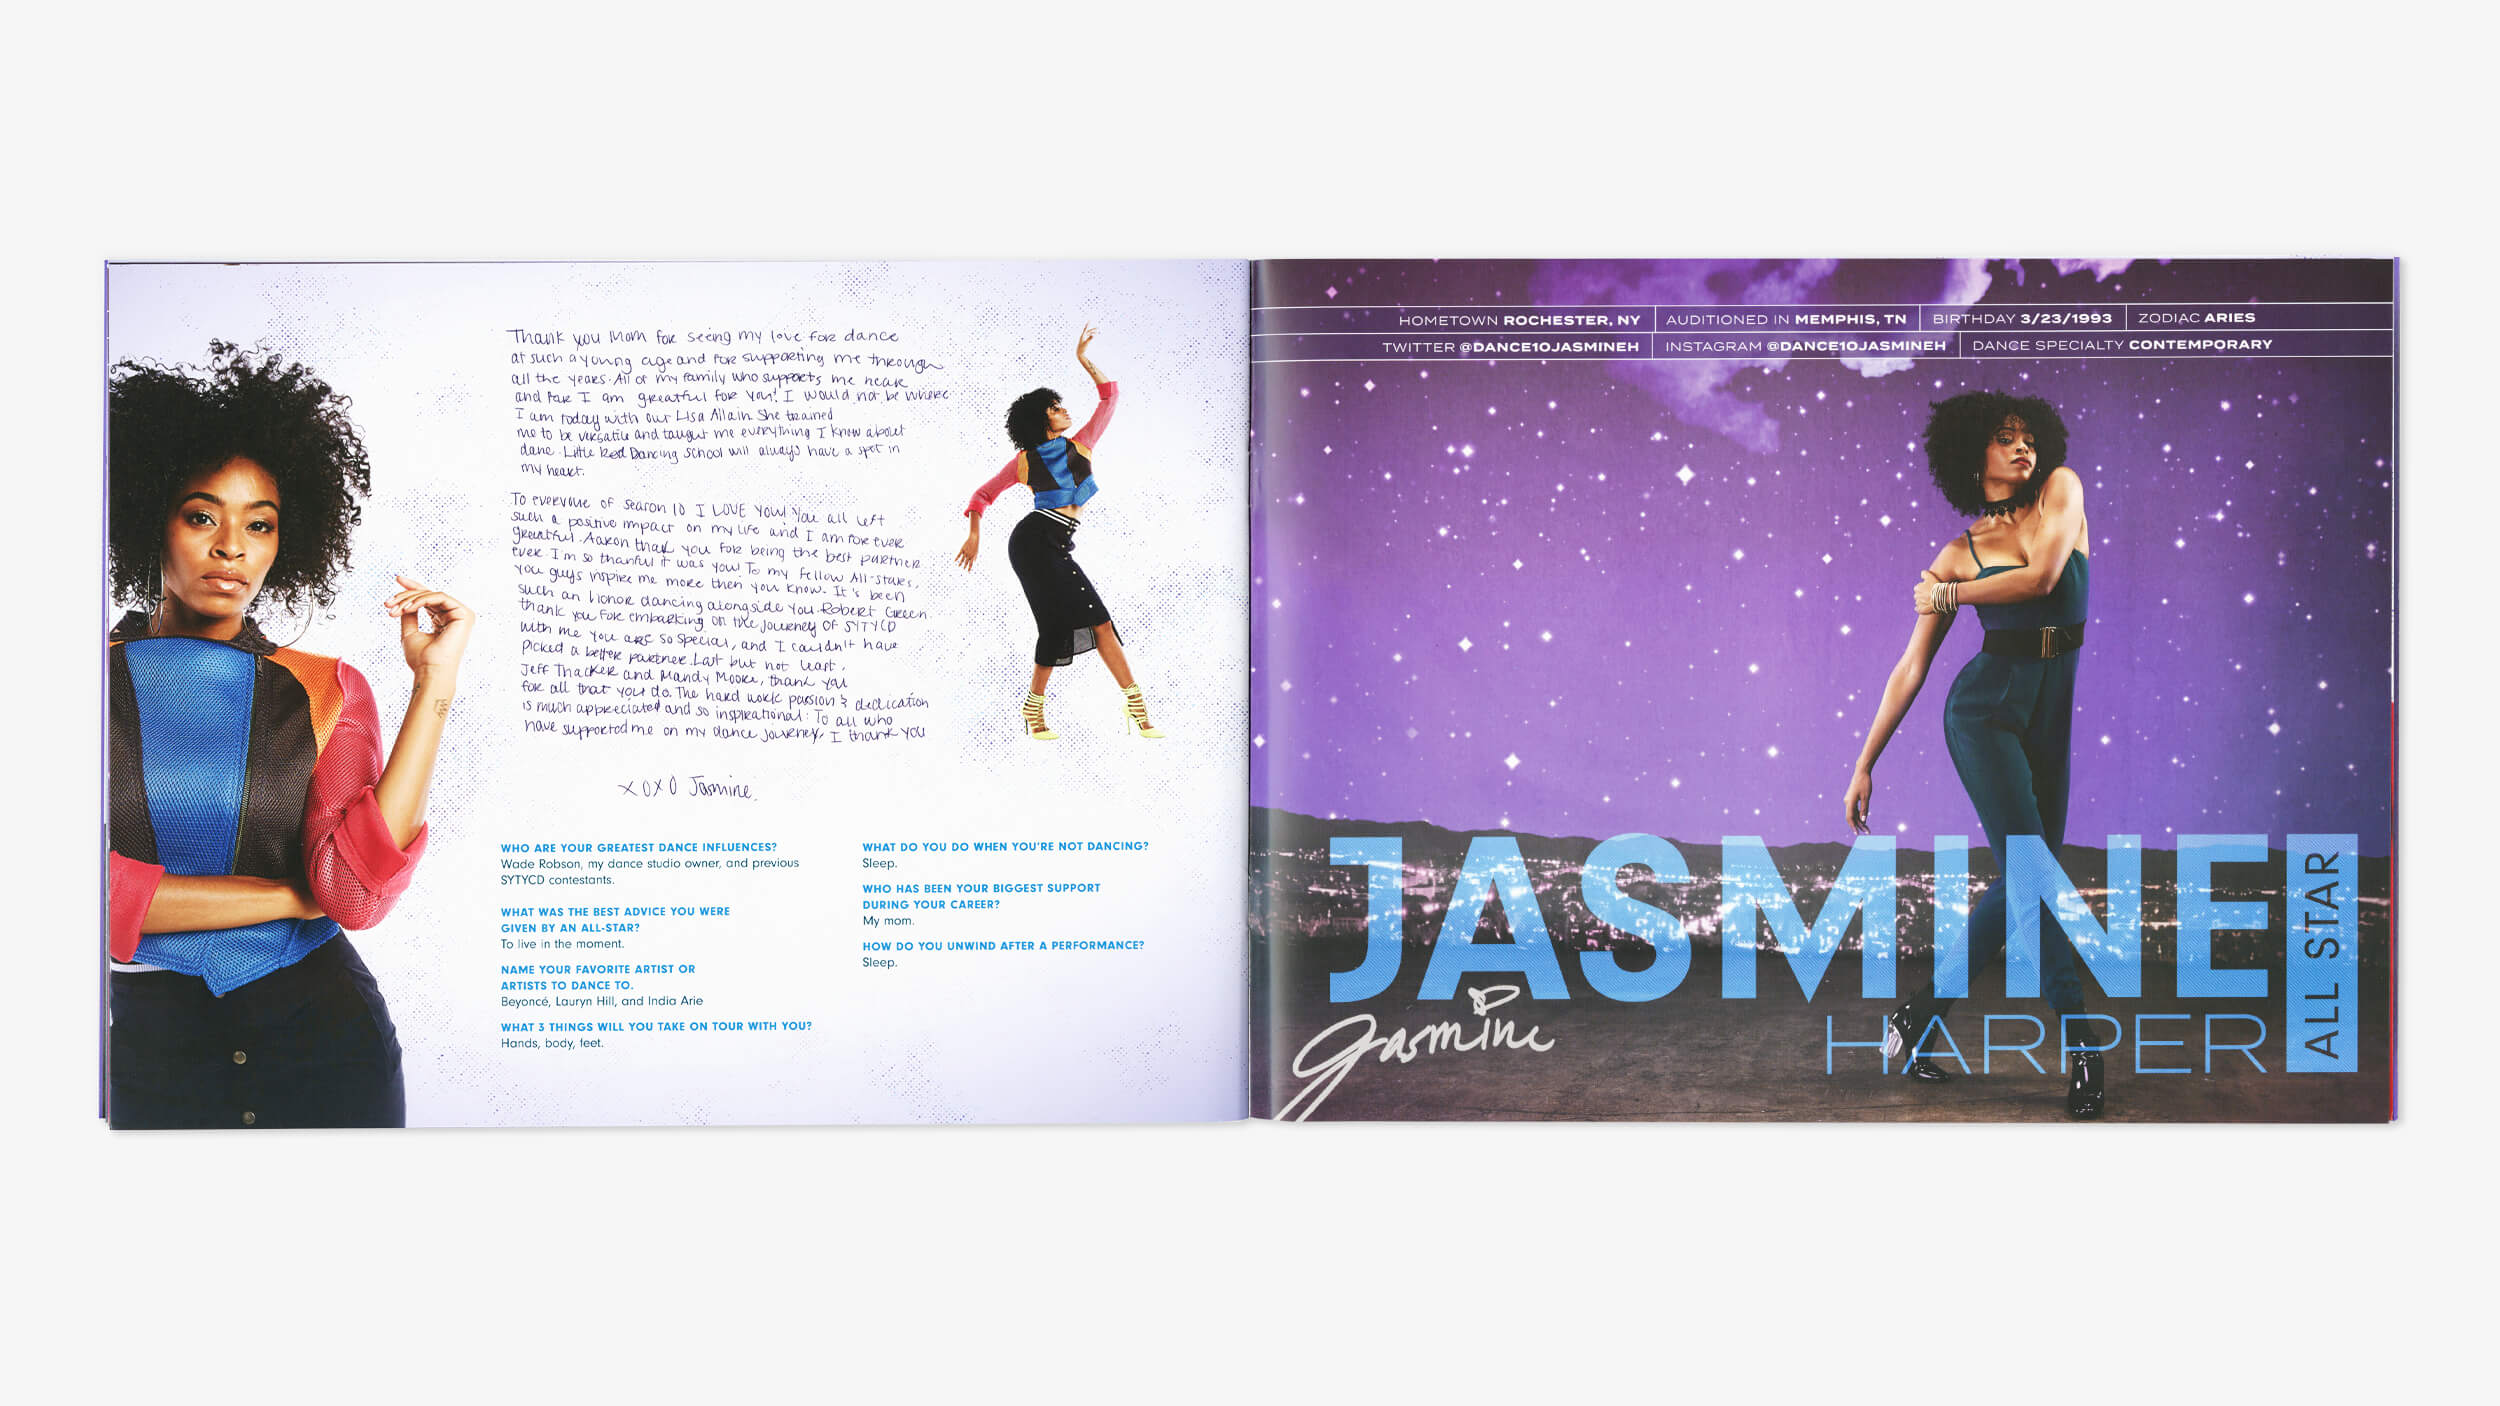 So You Think You Can Dance - Jasmine Harper